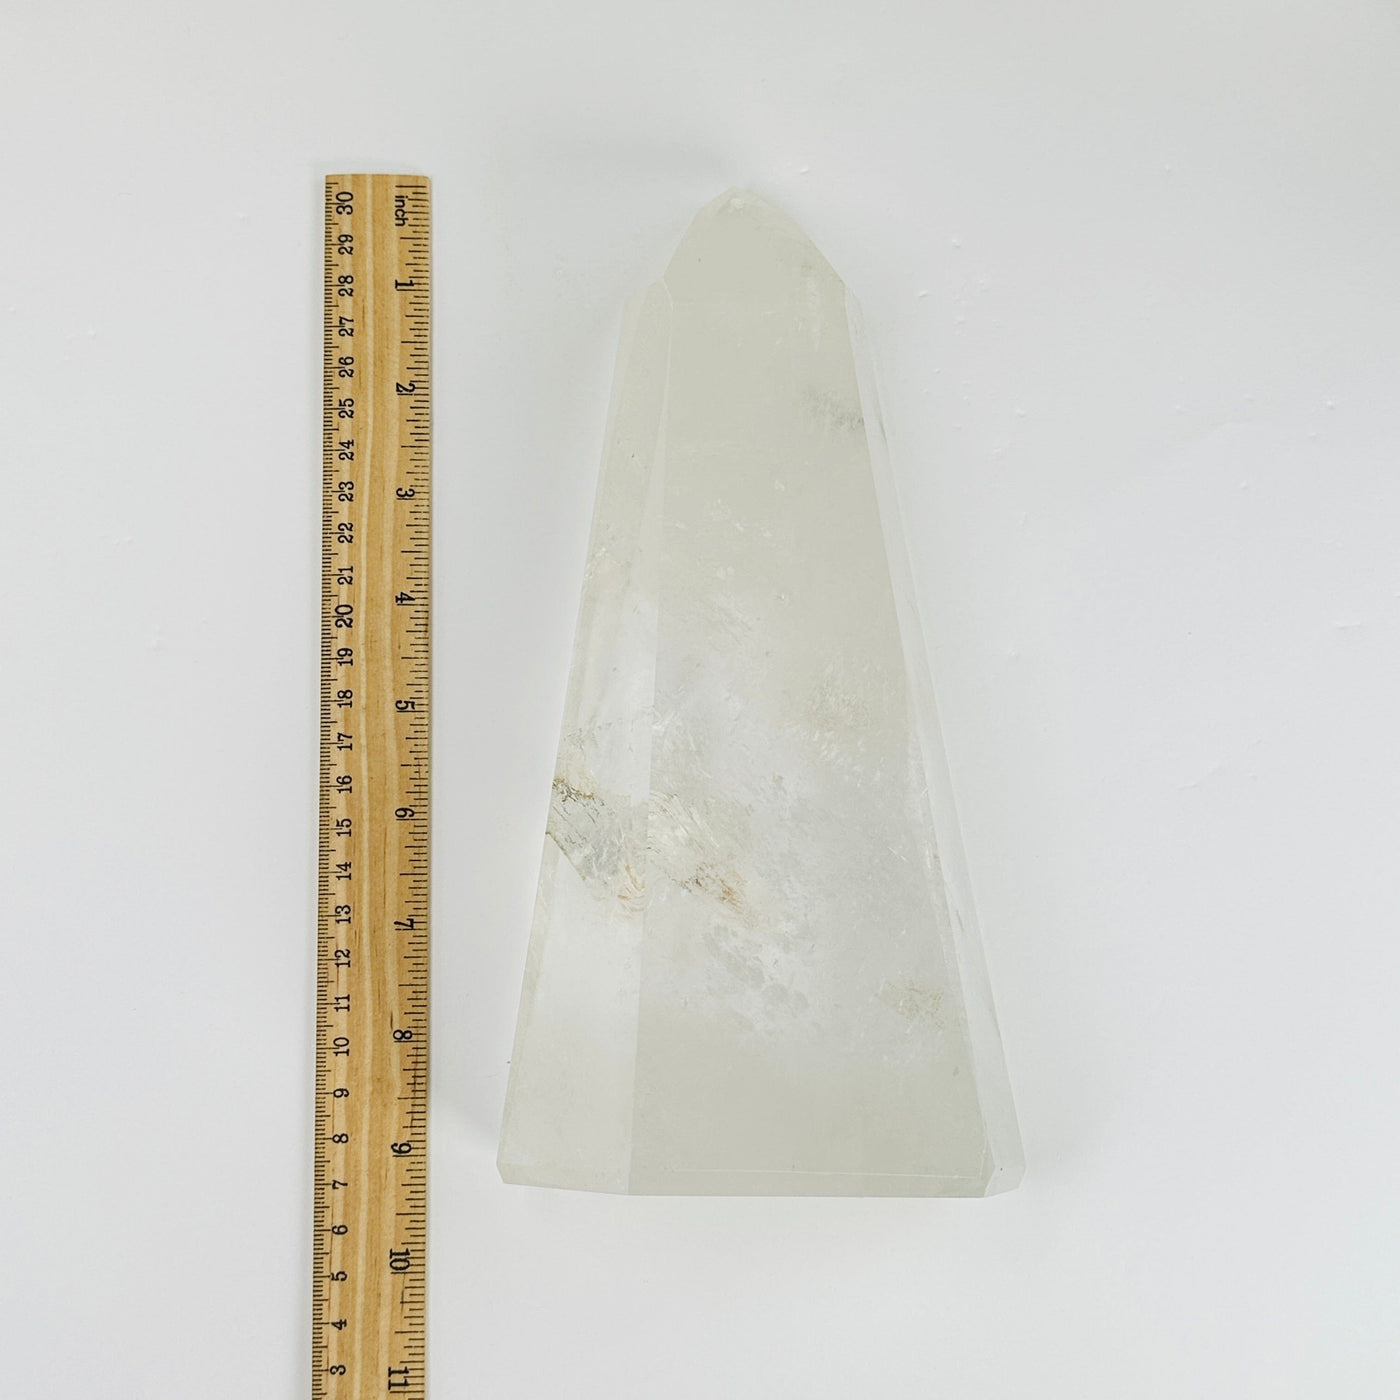 Crystal Quartz polished tower next to a ruler for size reference